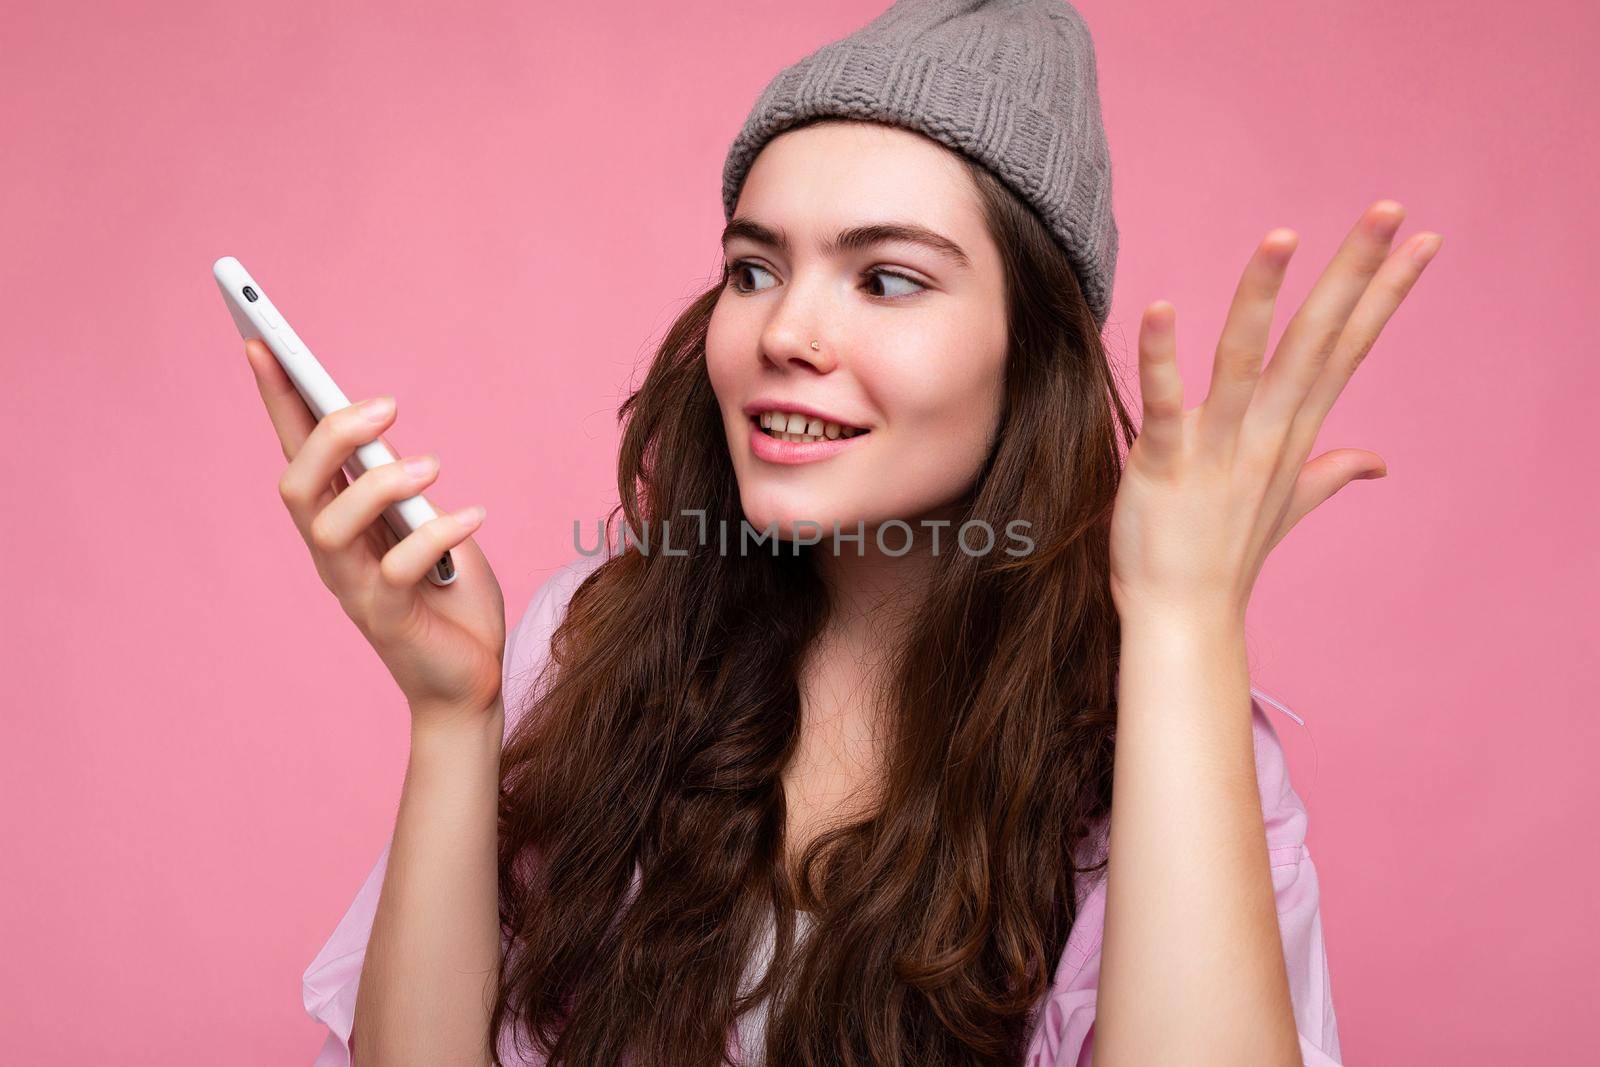 Closeup photo of Emotional attractive young brunette woman wearing stylish pink shirt and grey hat isolated over pink background holding in hand and using mobile phone communicating and recording voice message.